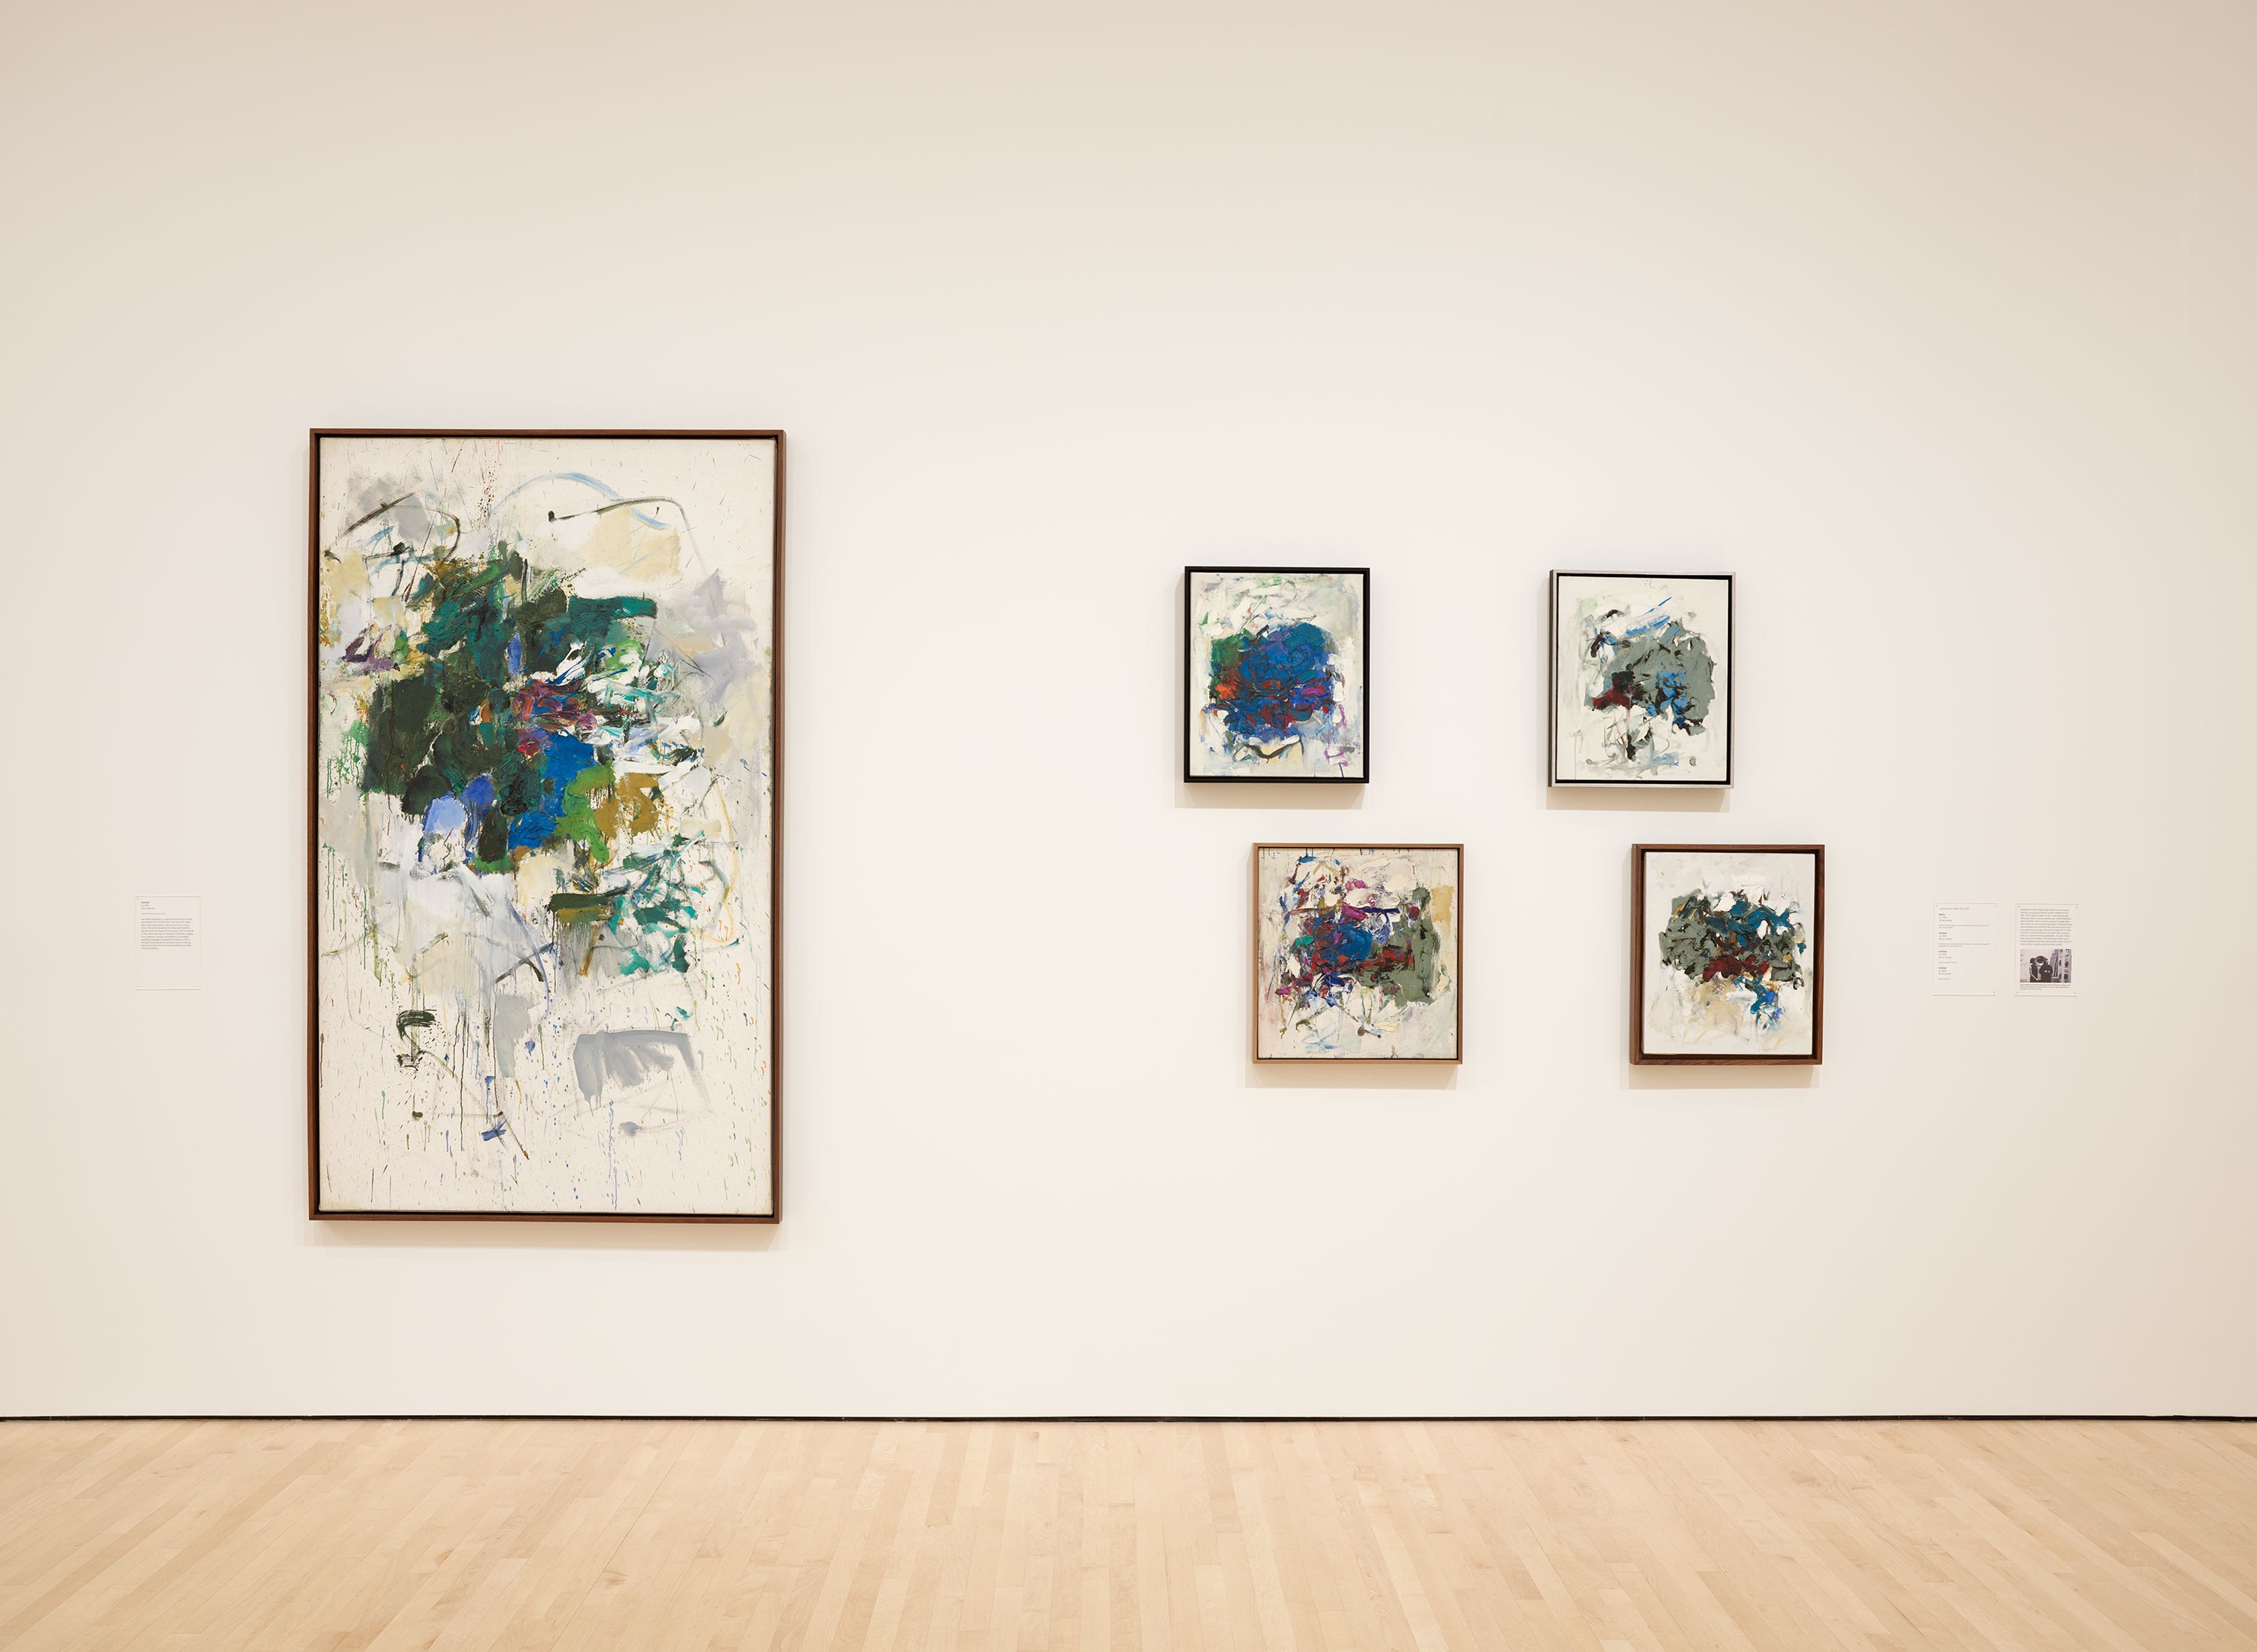 In The Artist's Studio, Joan Mitchell: 'A Life Lived Through Color' at  SFMOMA